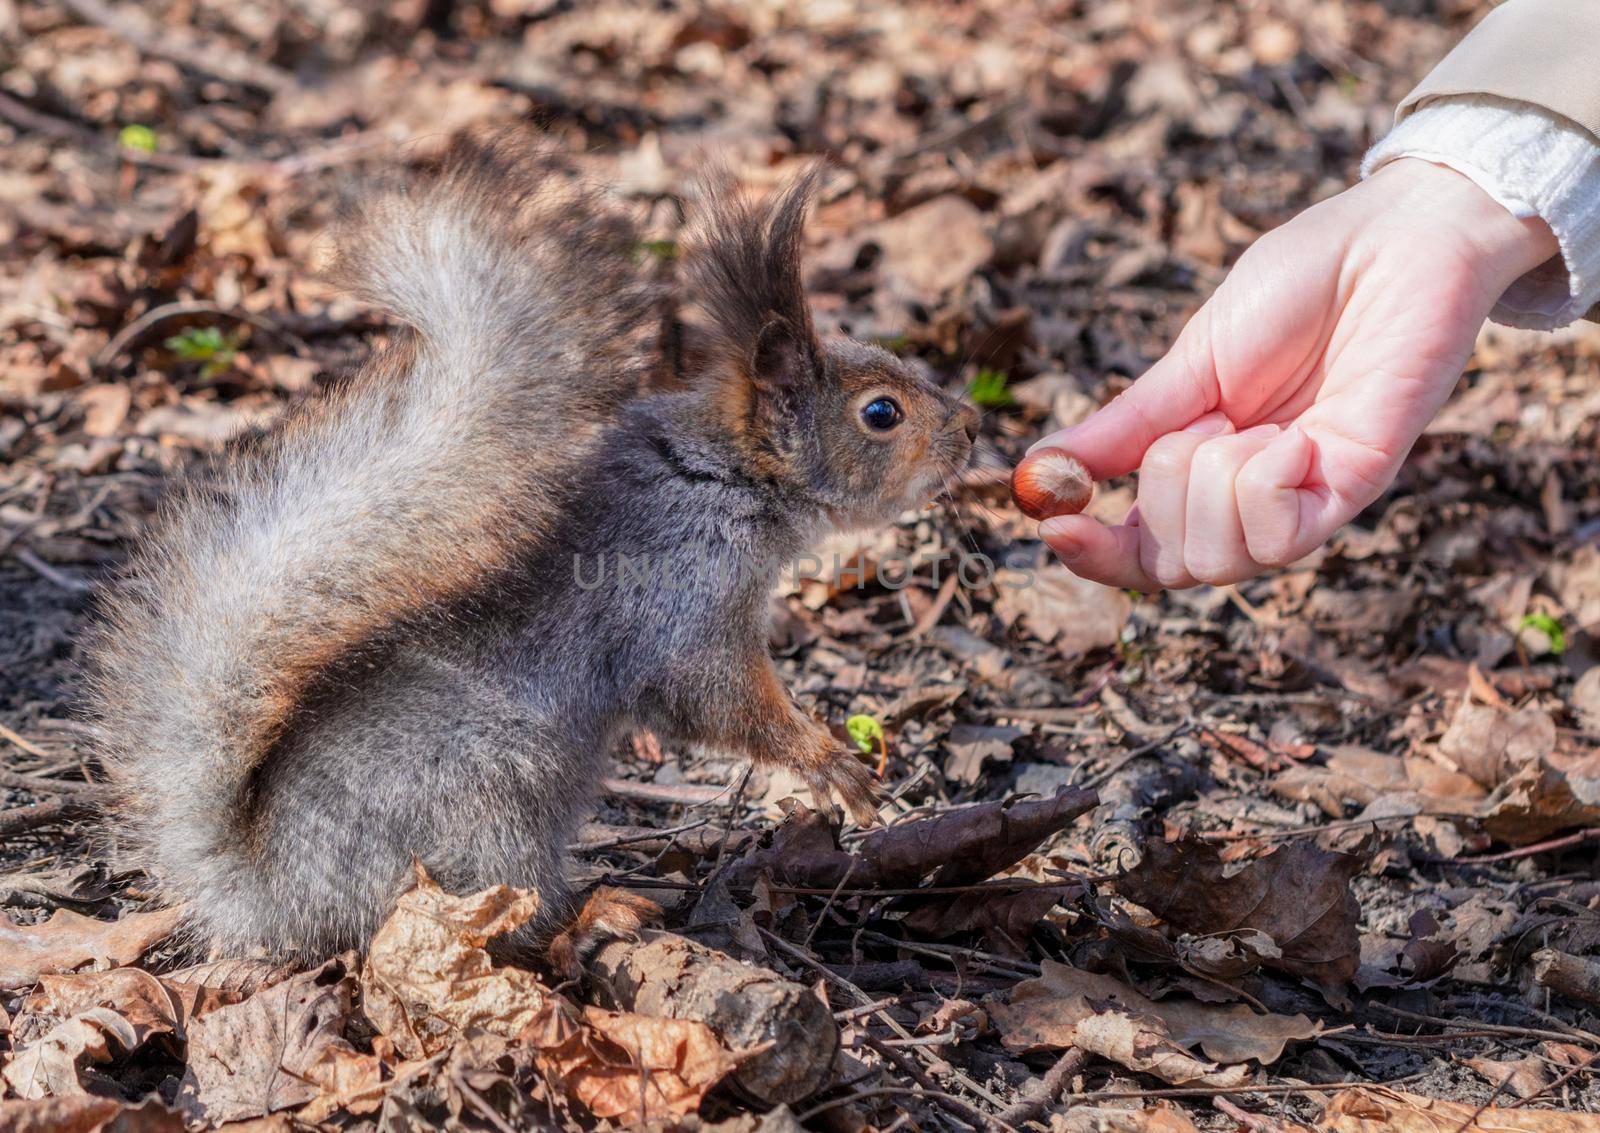 Squirrel in the autumn forest park. Squirrel in the autumn foliage takes the nuts from the woman's hands.